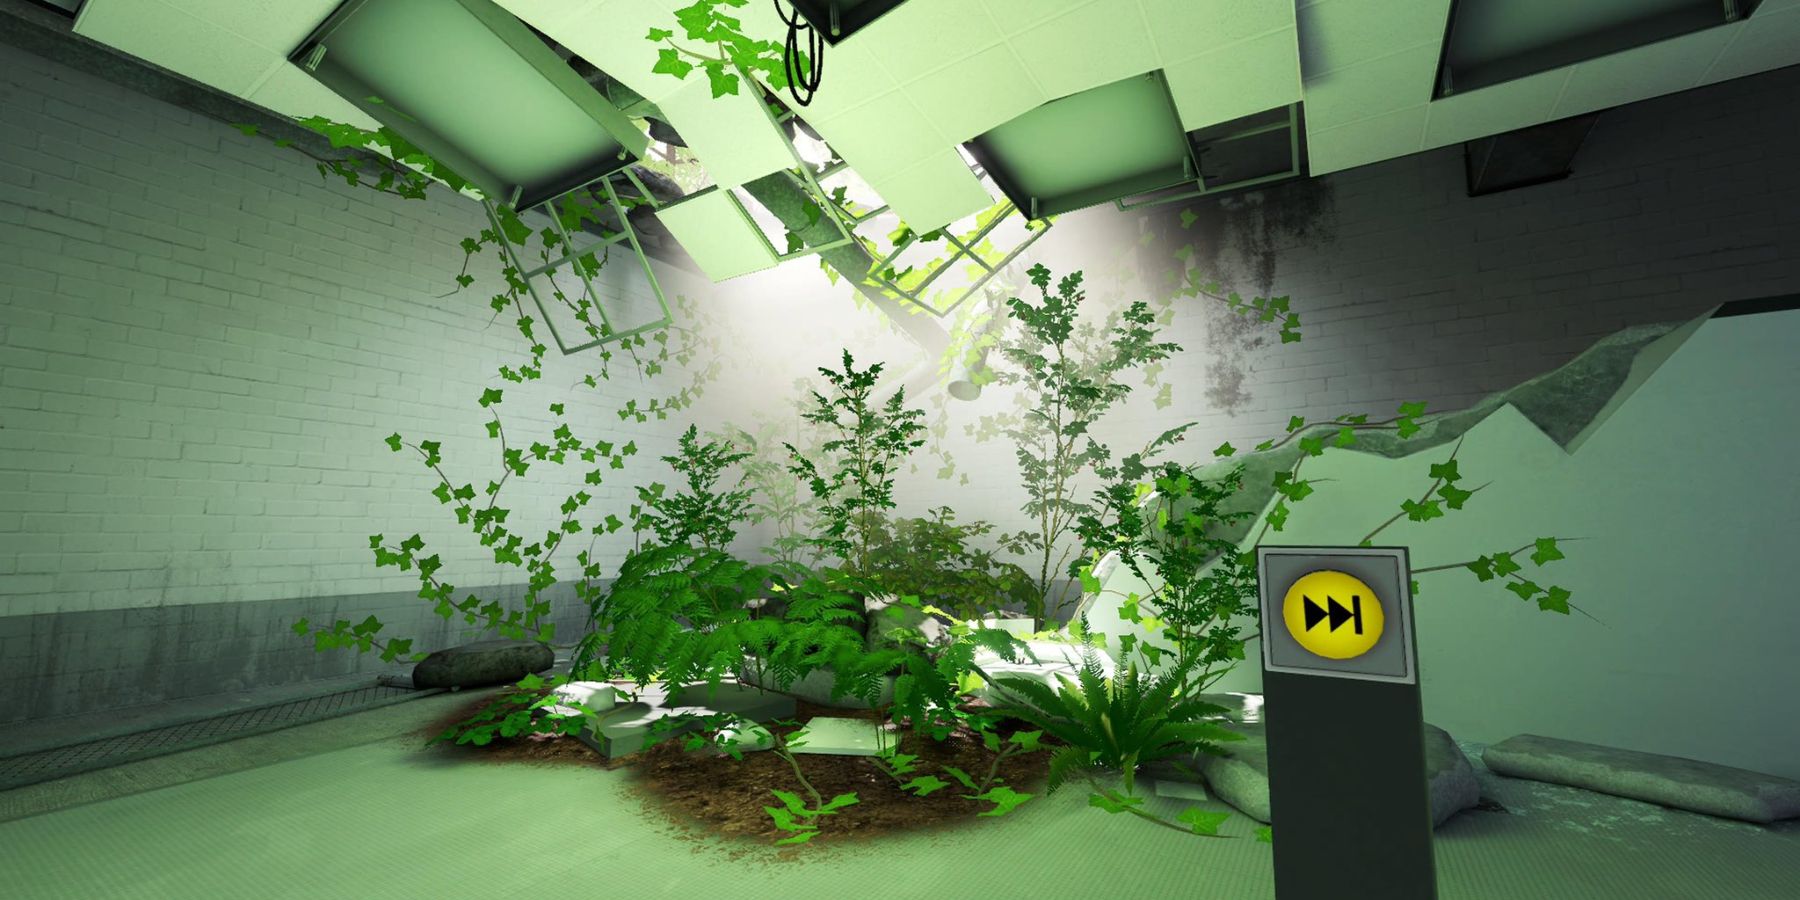 a room that has partially collapsed. Vegetation has grown in the corner where the ceiling is open to the sky. In front of the plants is a small post with a yellow button on it with two arrows pointing right toward a single line